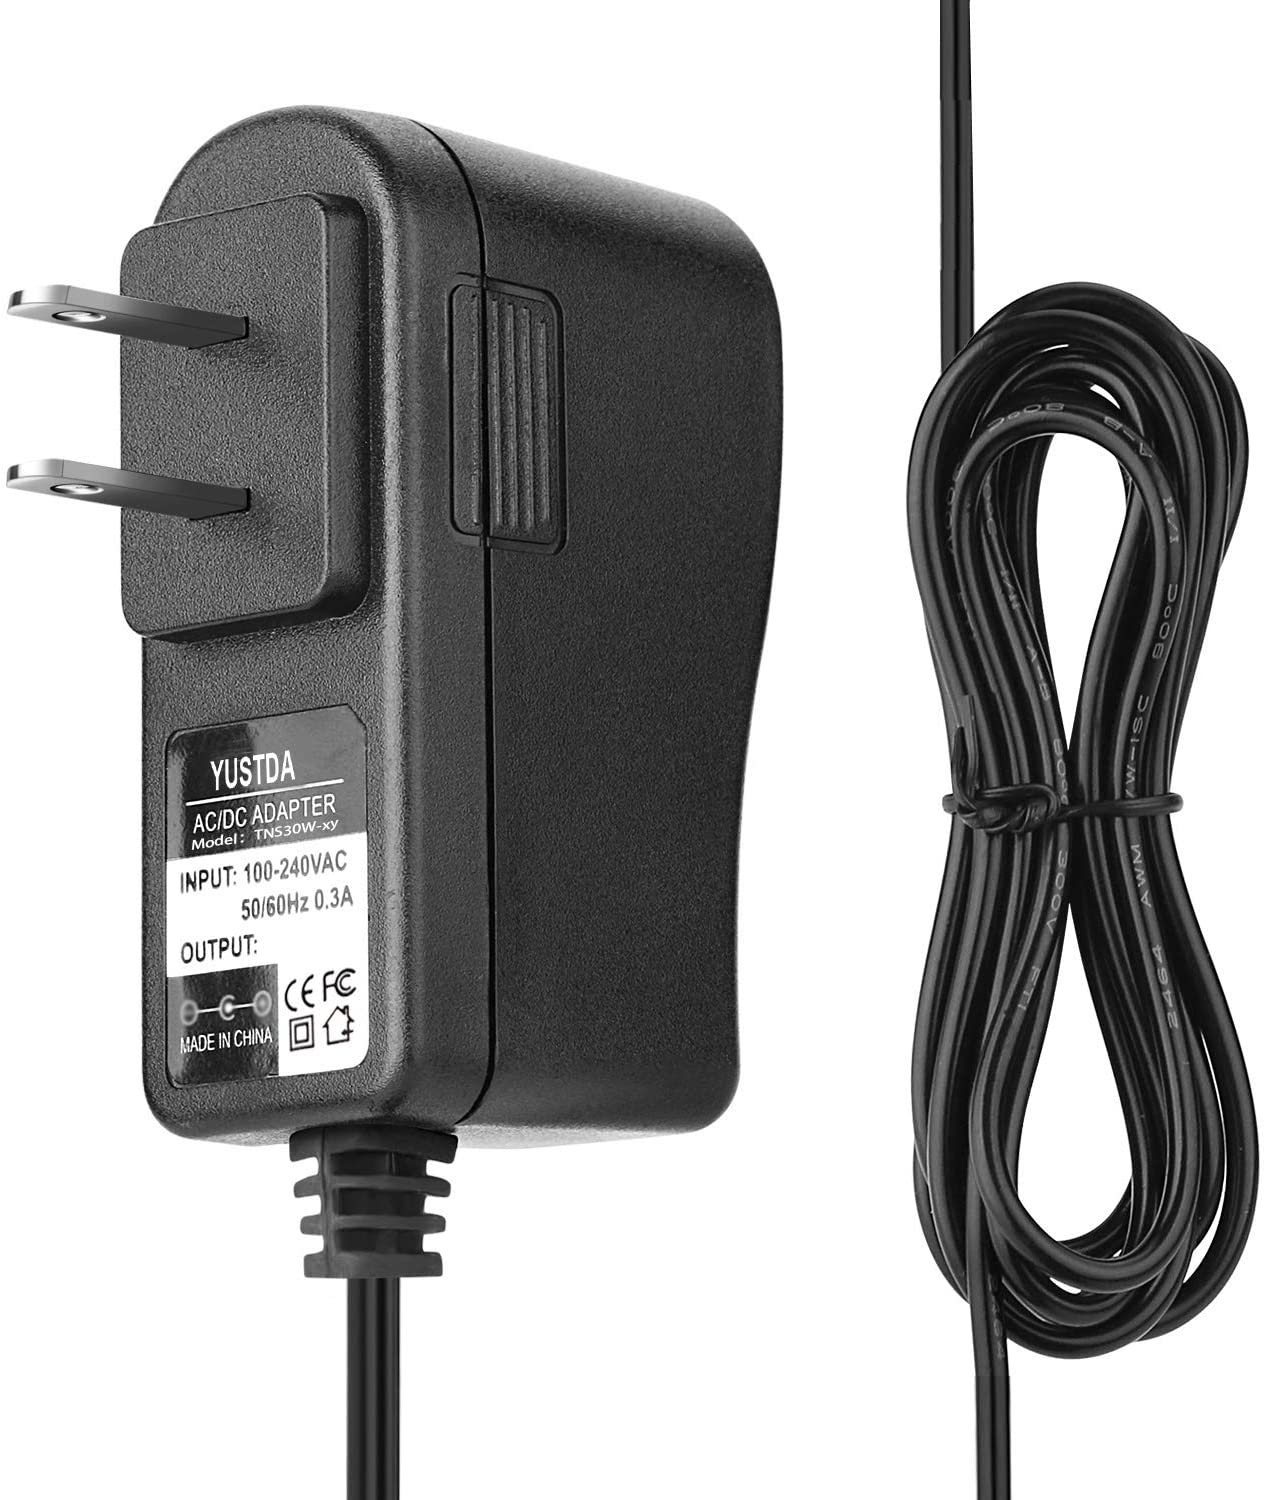 Yustda AC Adapter Replacement for 24V Legiral Le9 Pro (NOT fit 18V Version) Deep Tissue Massage Gun Muscle Body Massage DC Power Supply Battery Charger Cord Cable - image 1 of 4